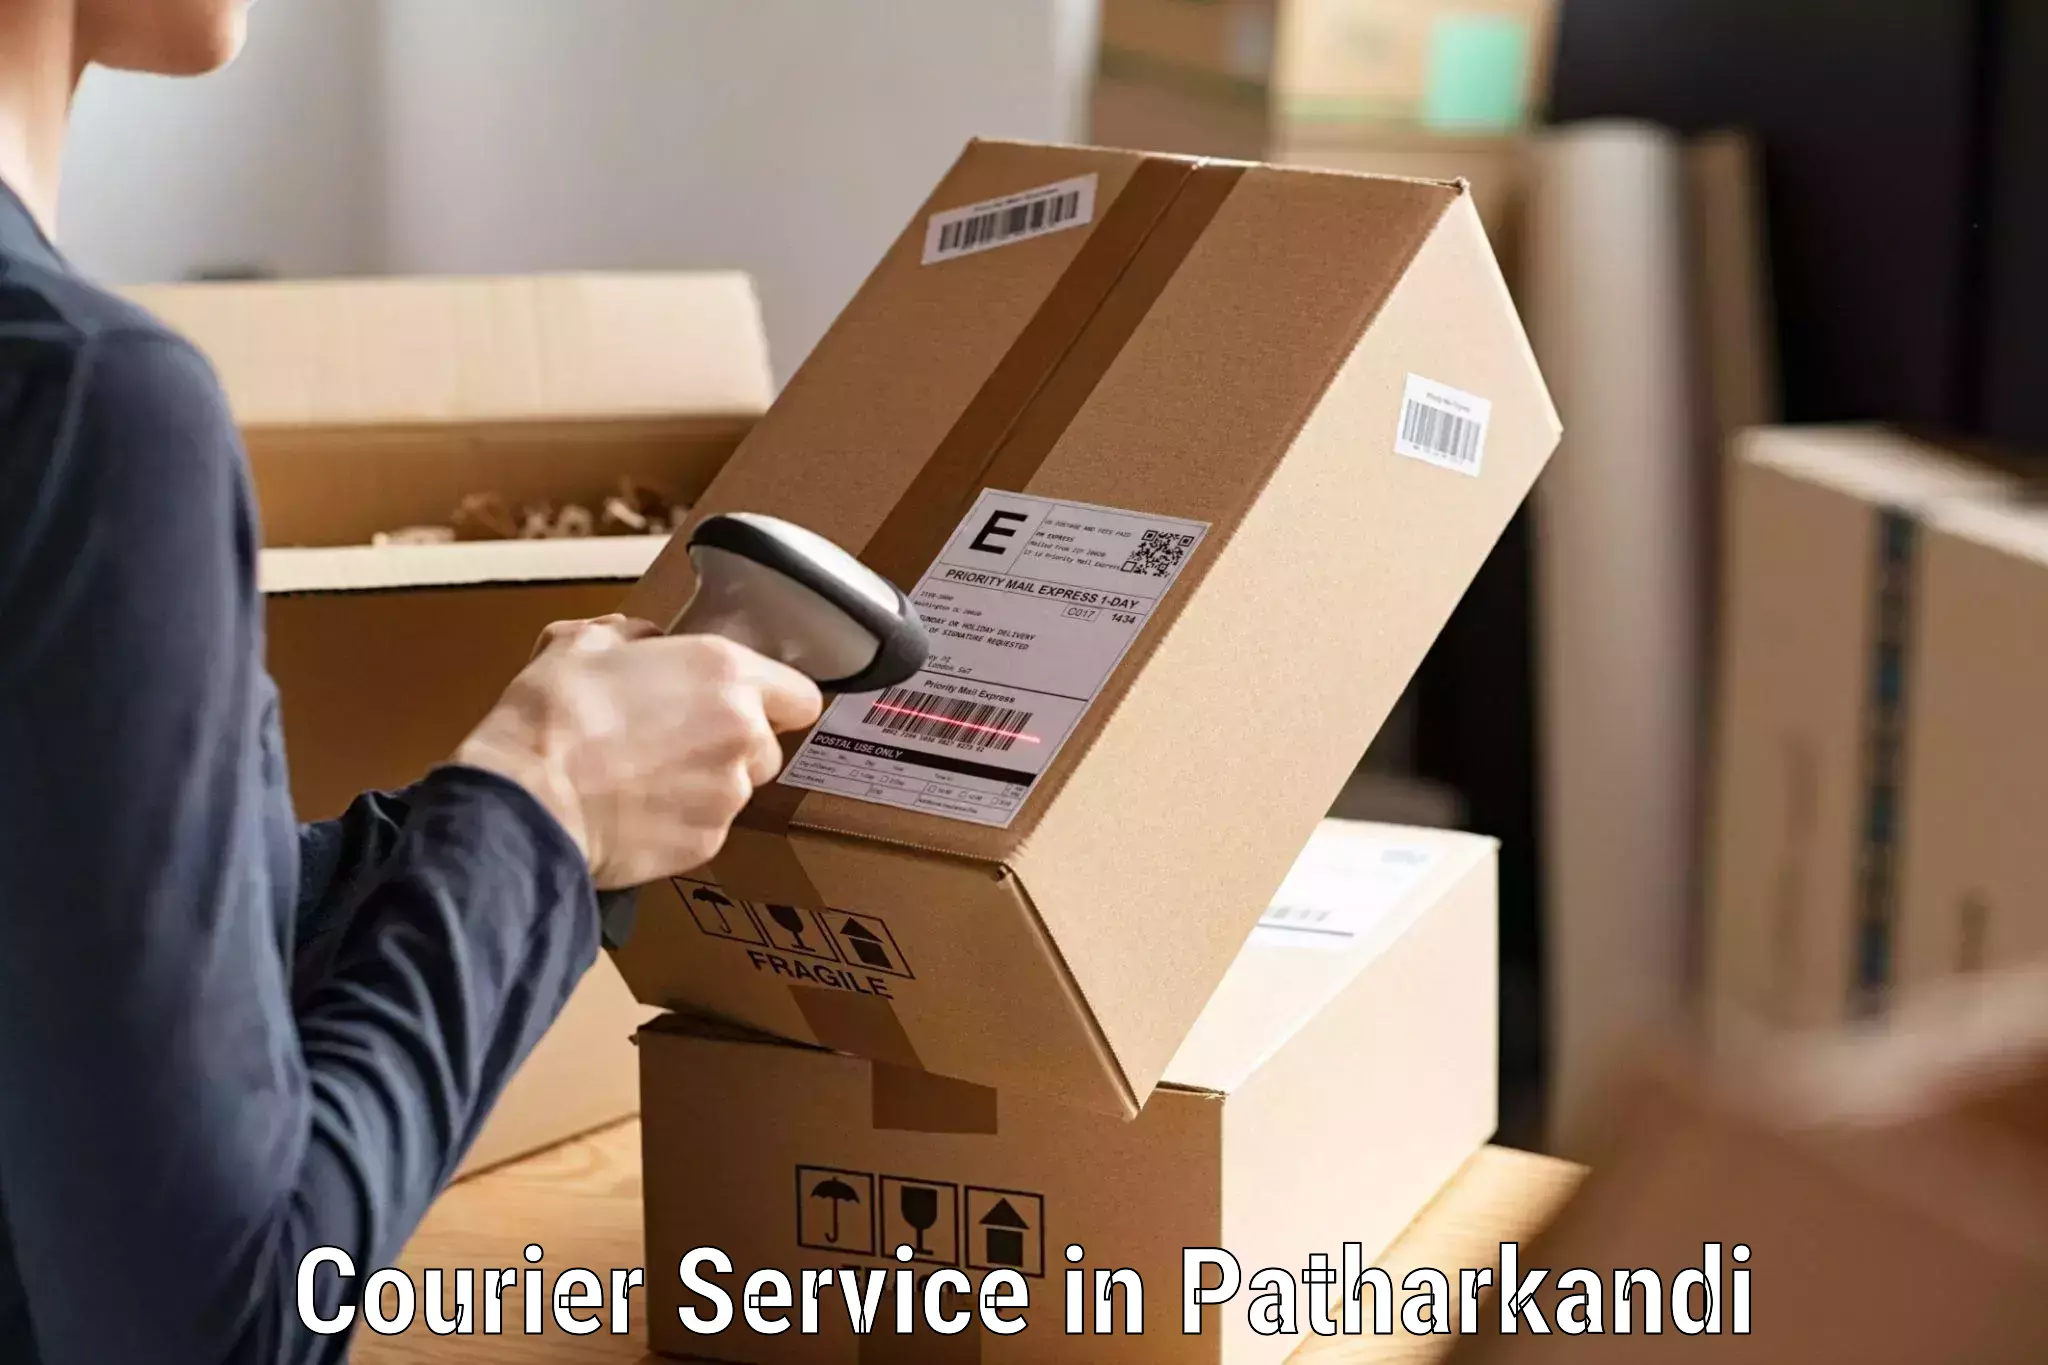 Multi-service courier options in Patharkandi